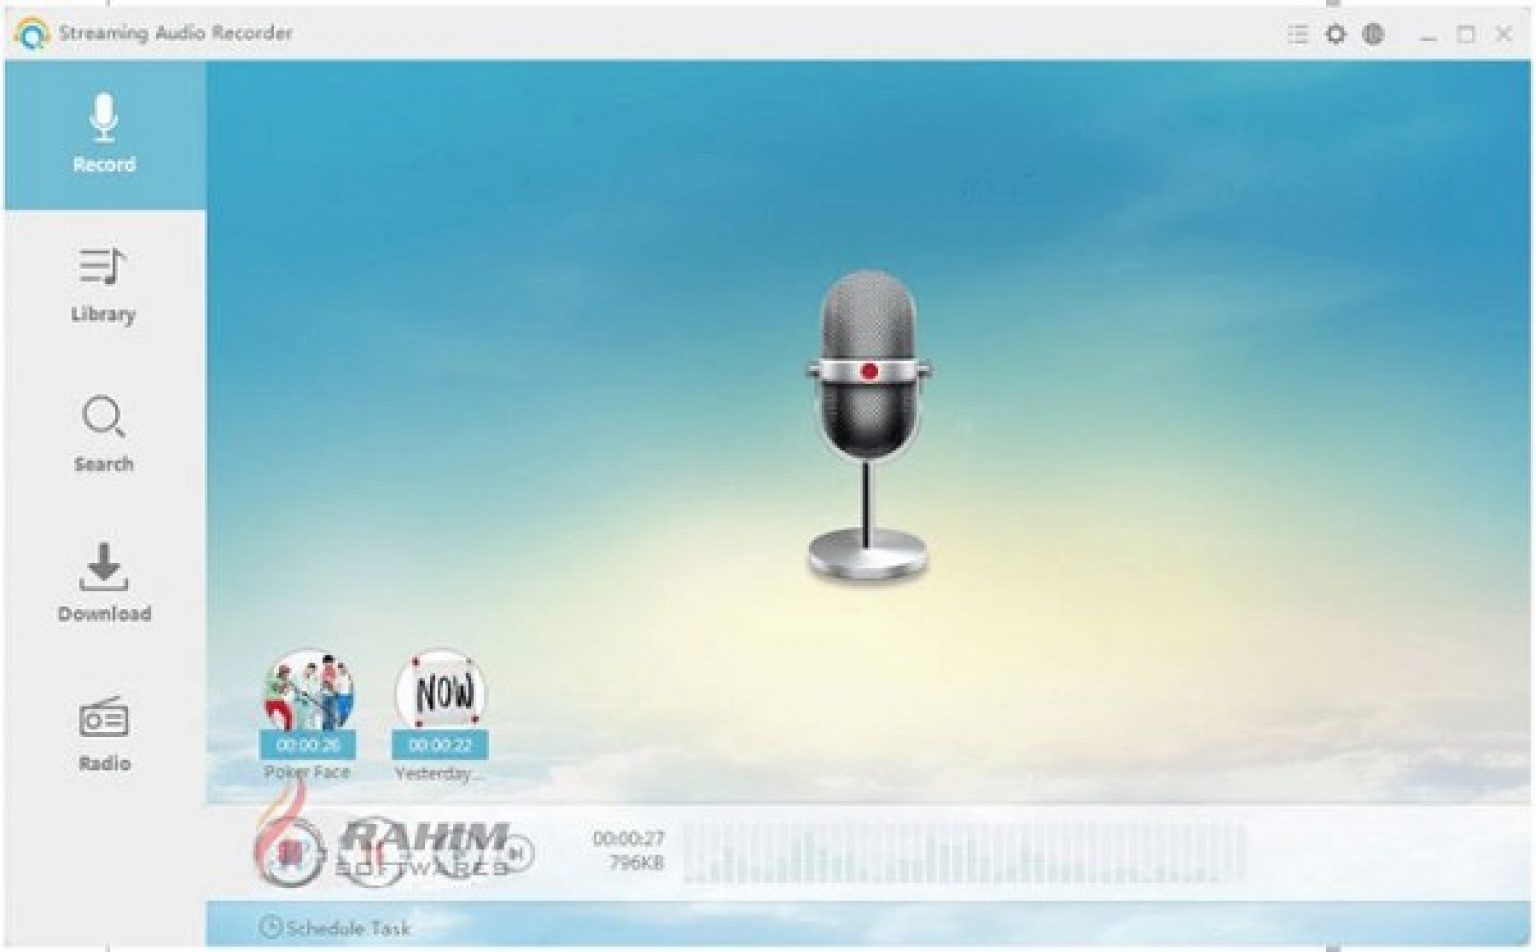 Abyssmedia i-Sound Recorder for Windows 7.9.4.3 download the last version for ios